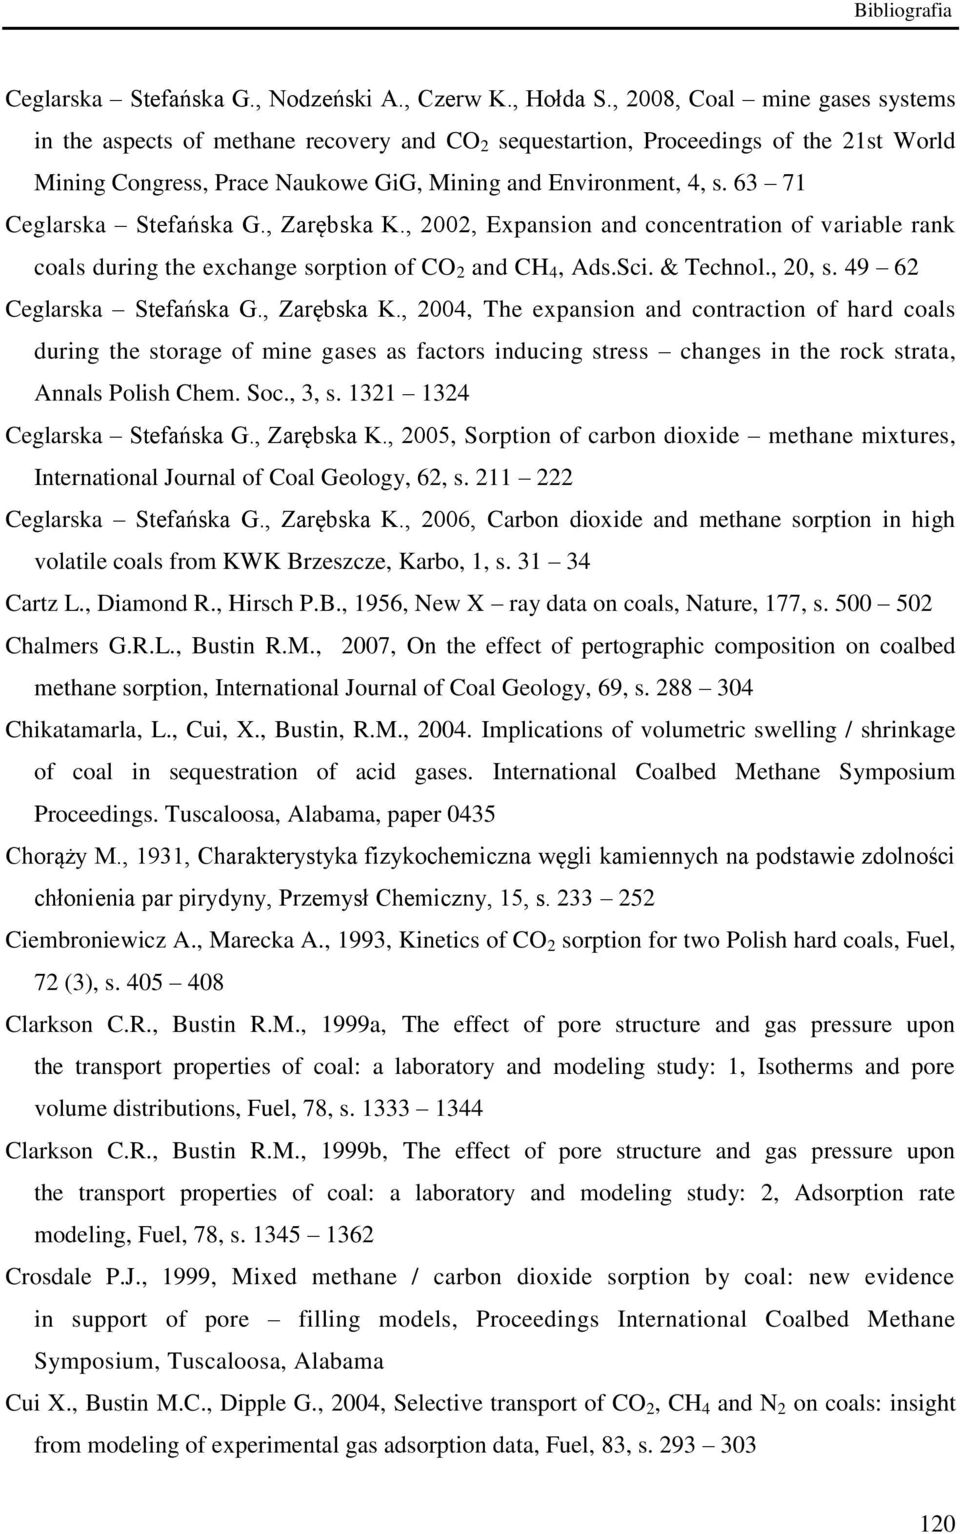 63 71 Ceglarska Stefańska G., Zarębska K., 2002, Expansion and concentration of variable rank coals during the exchange sorption of CO 2 and CH 4, Ads.Sci. & Technol., 20, s.